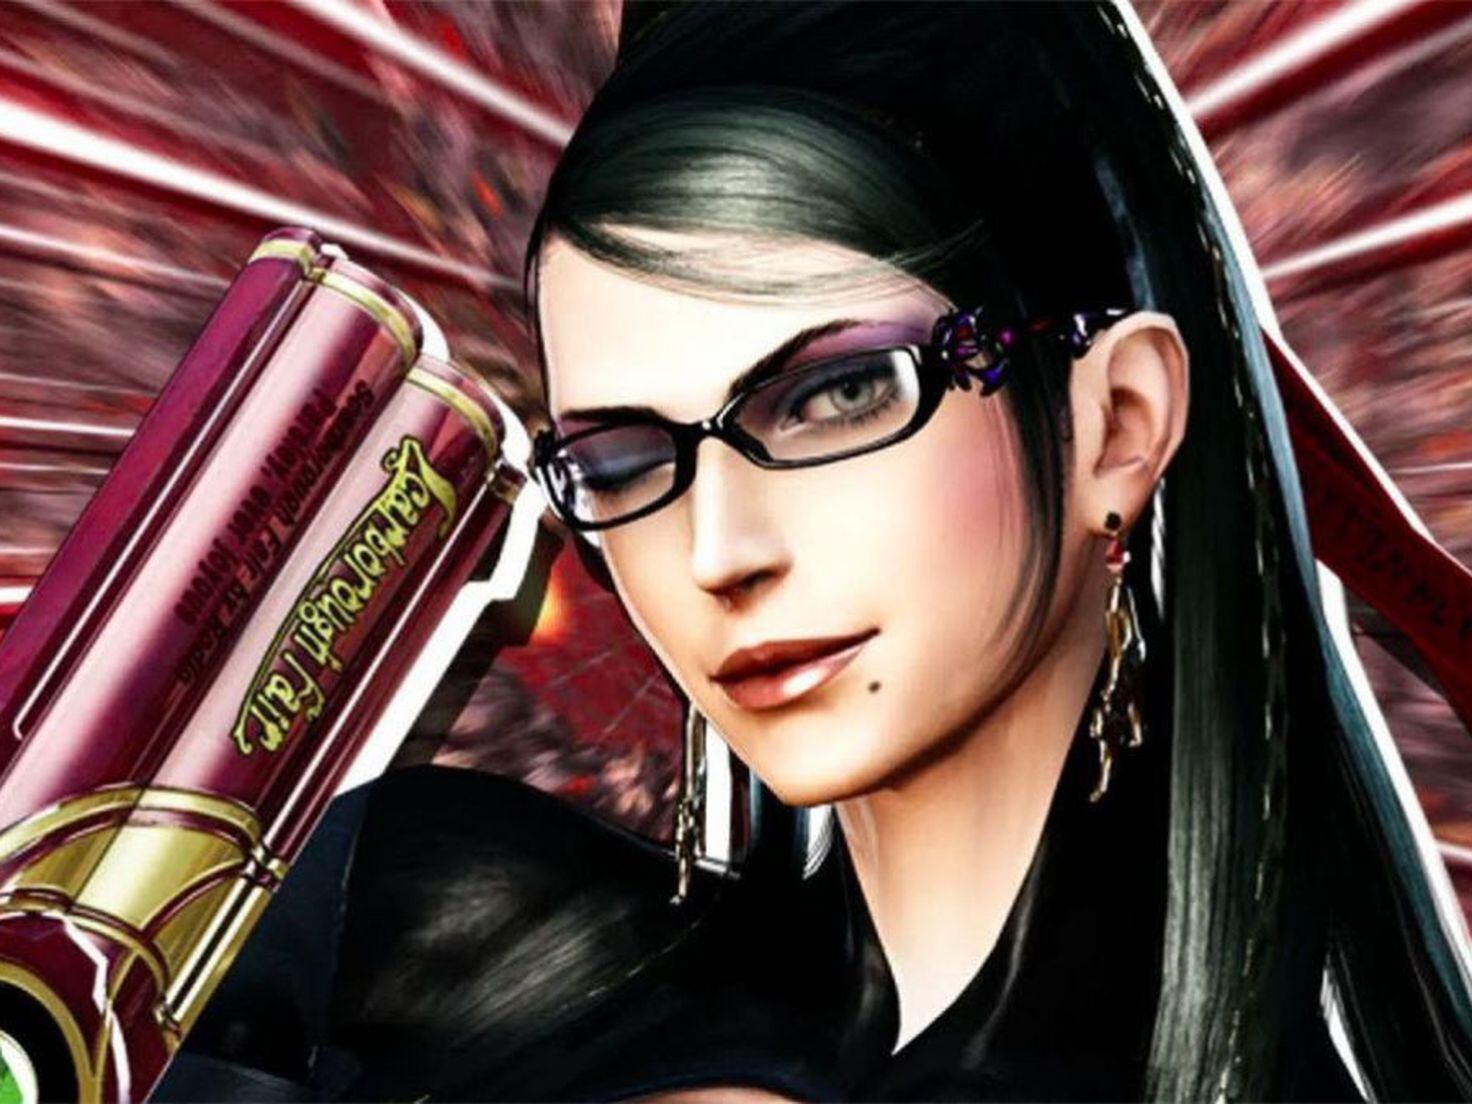 Nintendo Expects Bayonetta 3 To Launch This Year, Metroid Prime 4